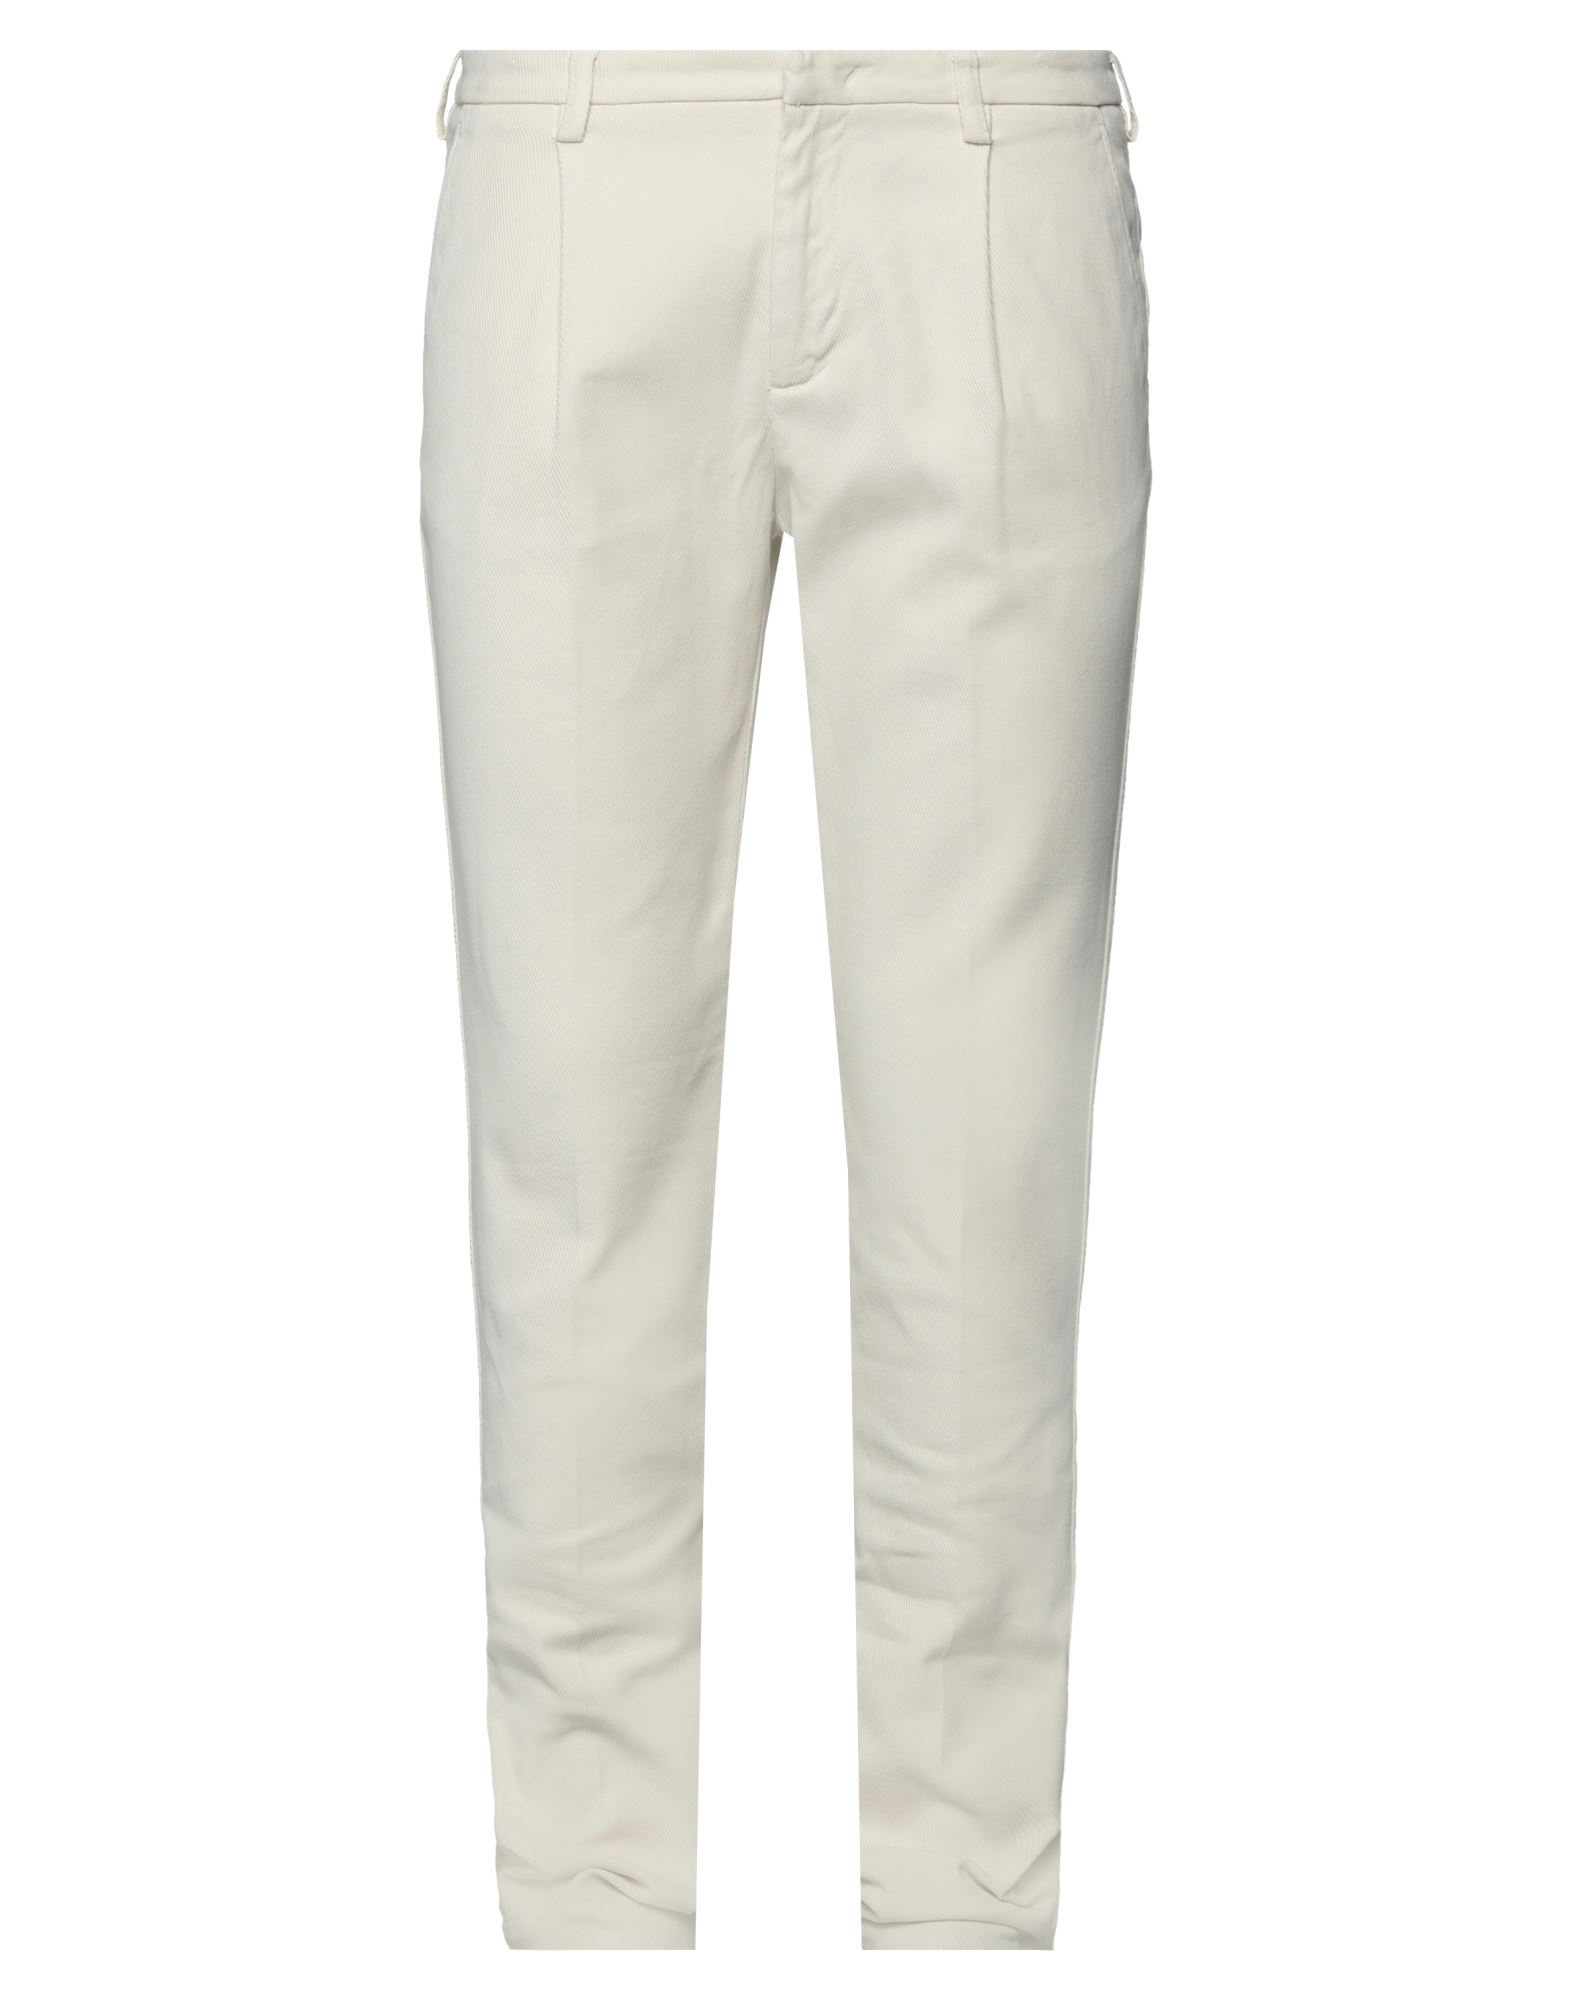 Entre Amis Pants In Ivory